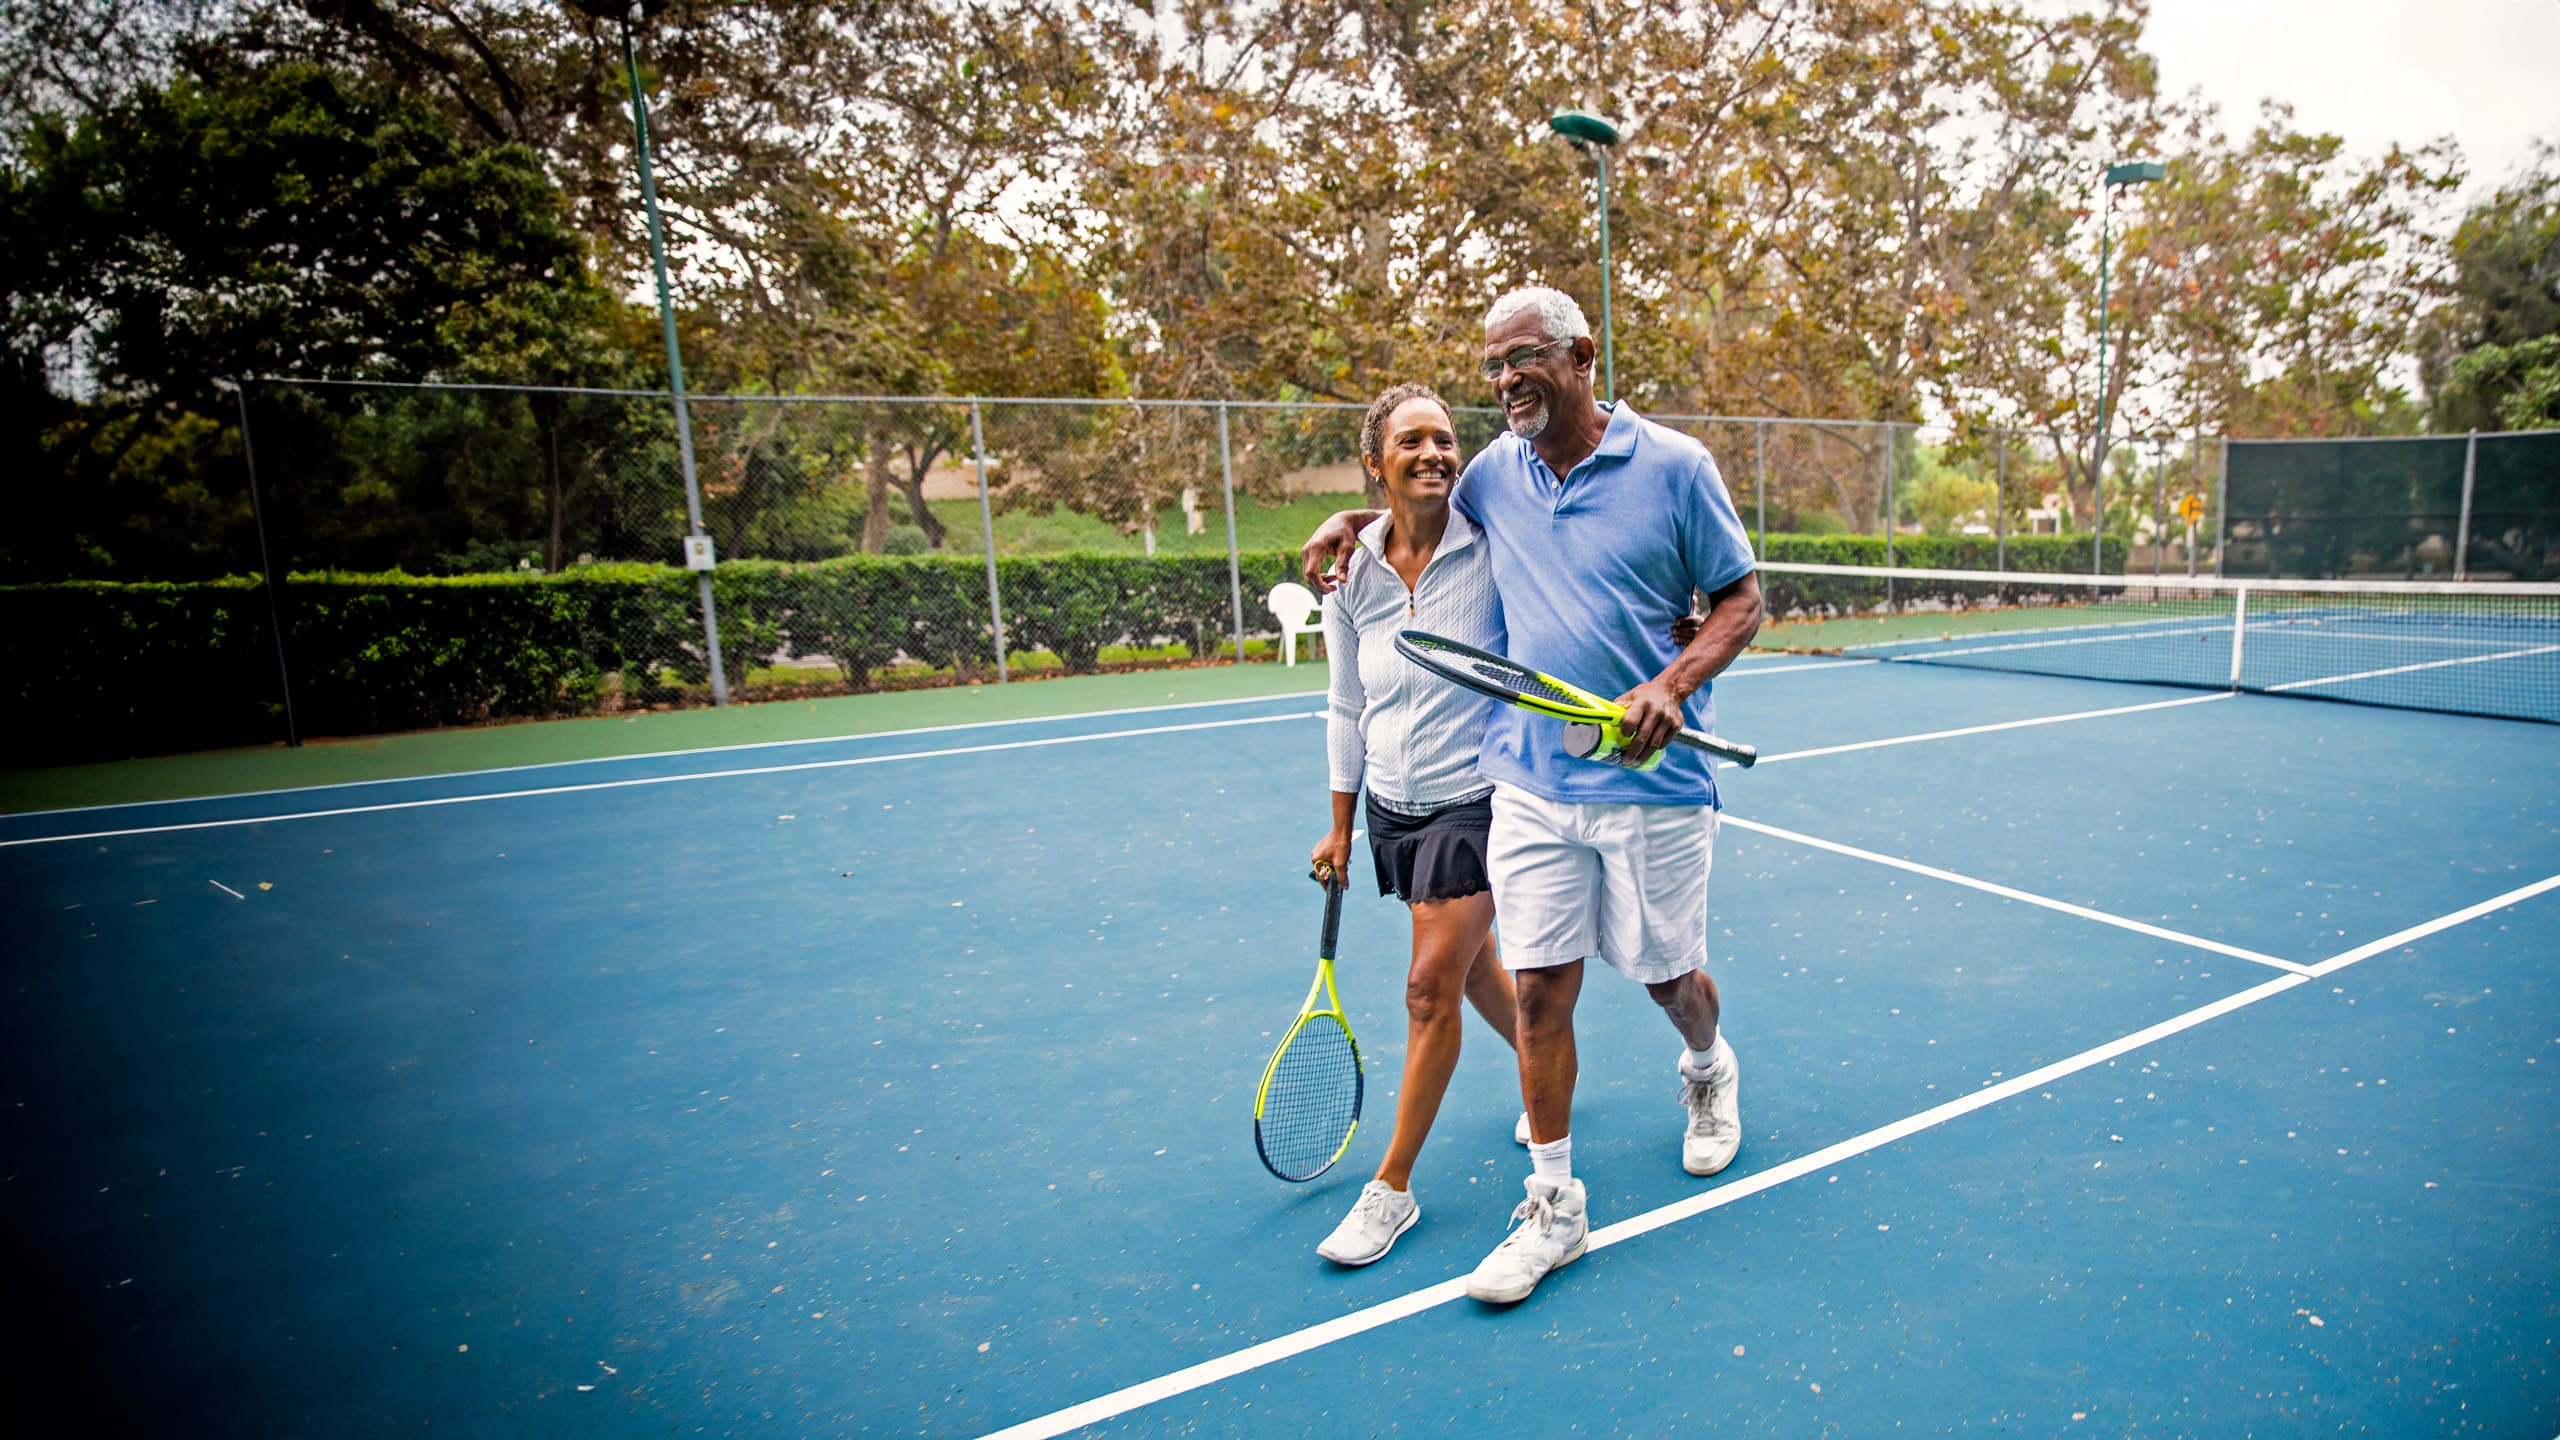 Senior couple with successful joint replacement surgery enjoying themselves after playing tennis outdoors